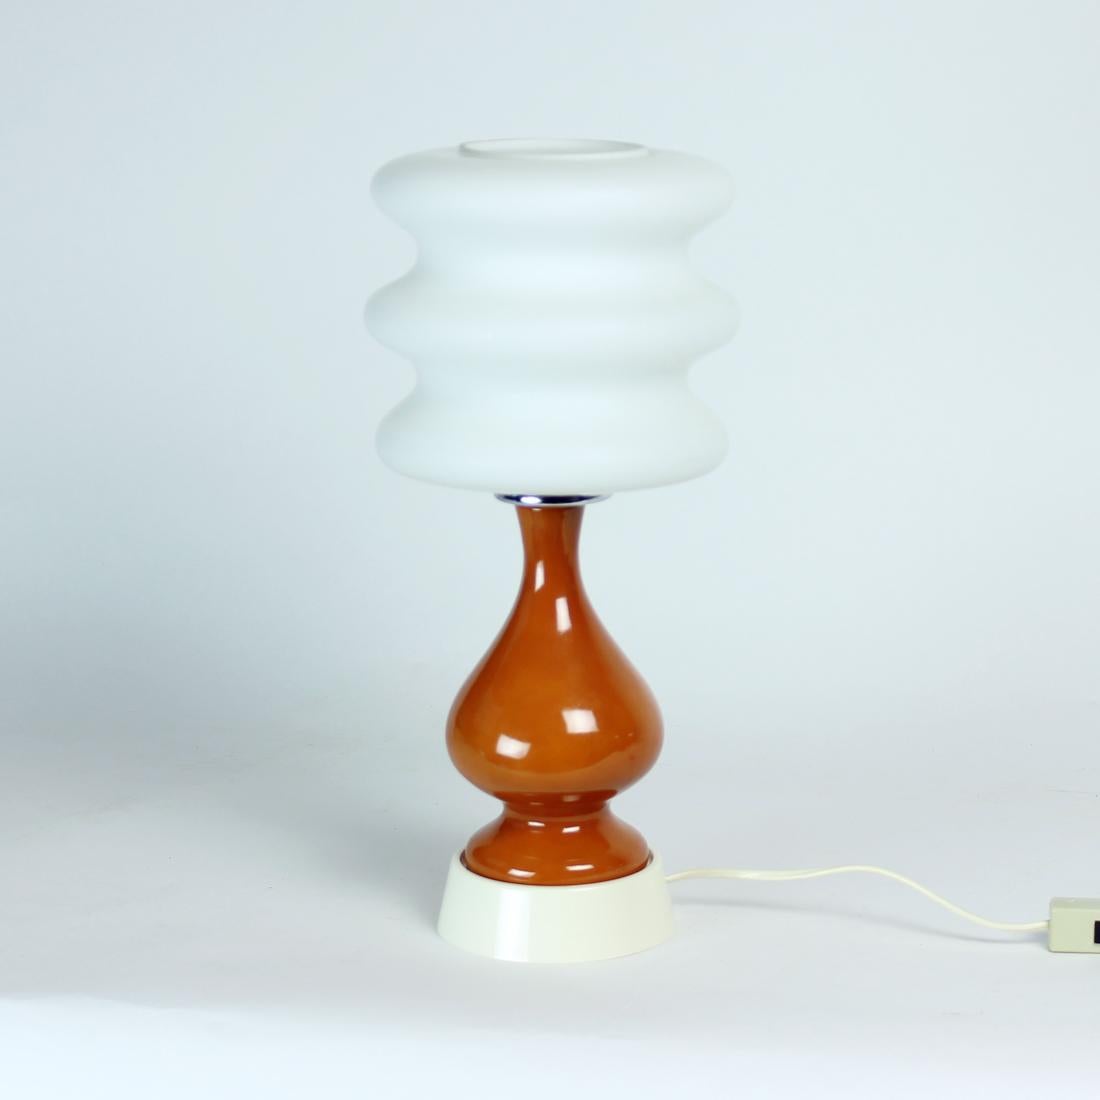 Beautiful table lamp from midcentury modern period. It looks like a work of art even when not lid up. Produced in Poland in 1960s by Polam Pila company. The lamp is made out of a ceramic body in dark orange/brown color which stands on a cream/white